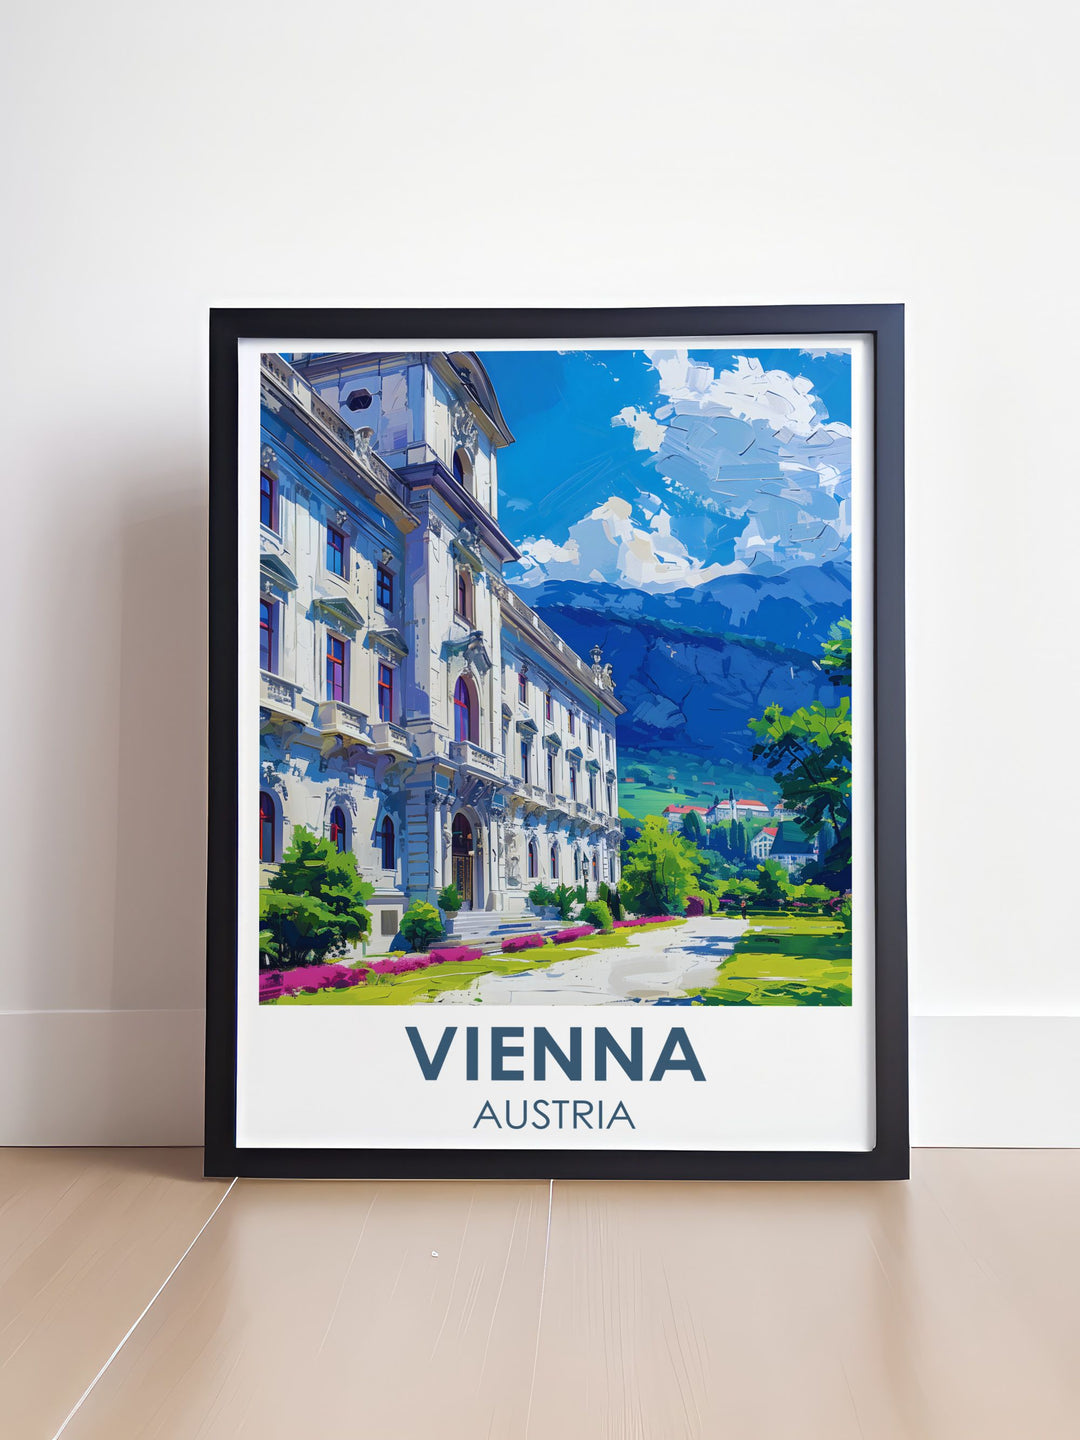 Elegant Vienna Wall Decor featuring the historic Belvedere Palace a beautiful addition to any home perfect for art lovers and travelers who admire Viennas architectural marvels